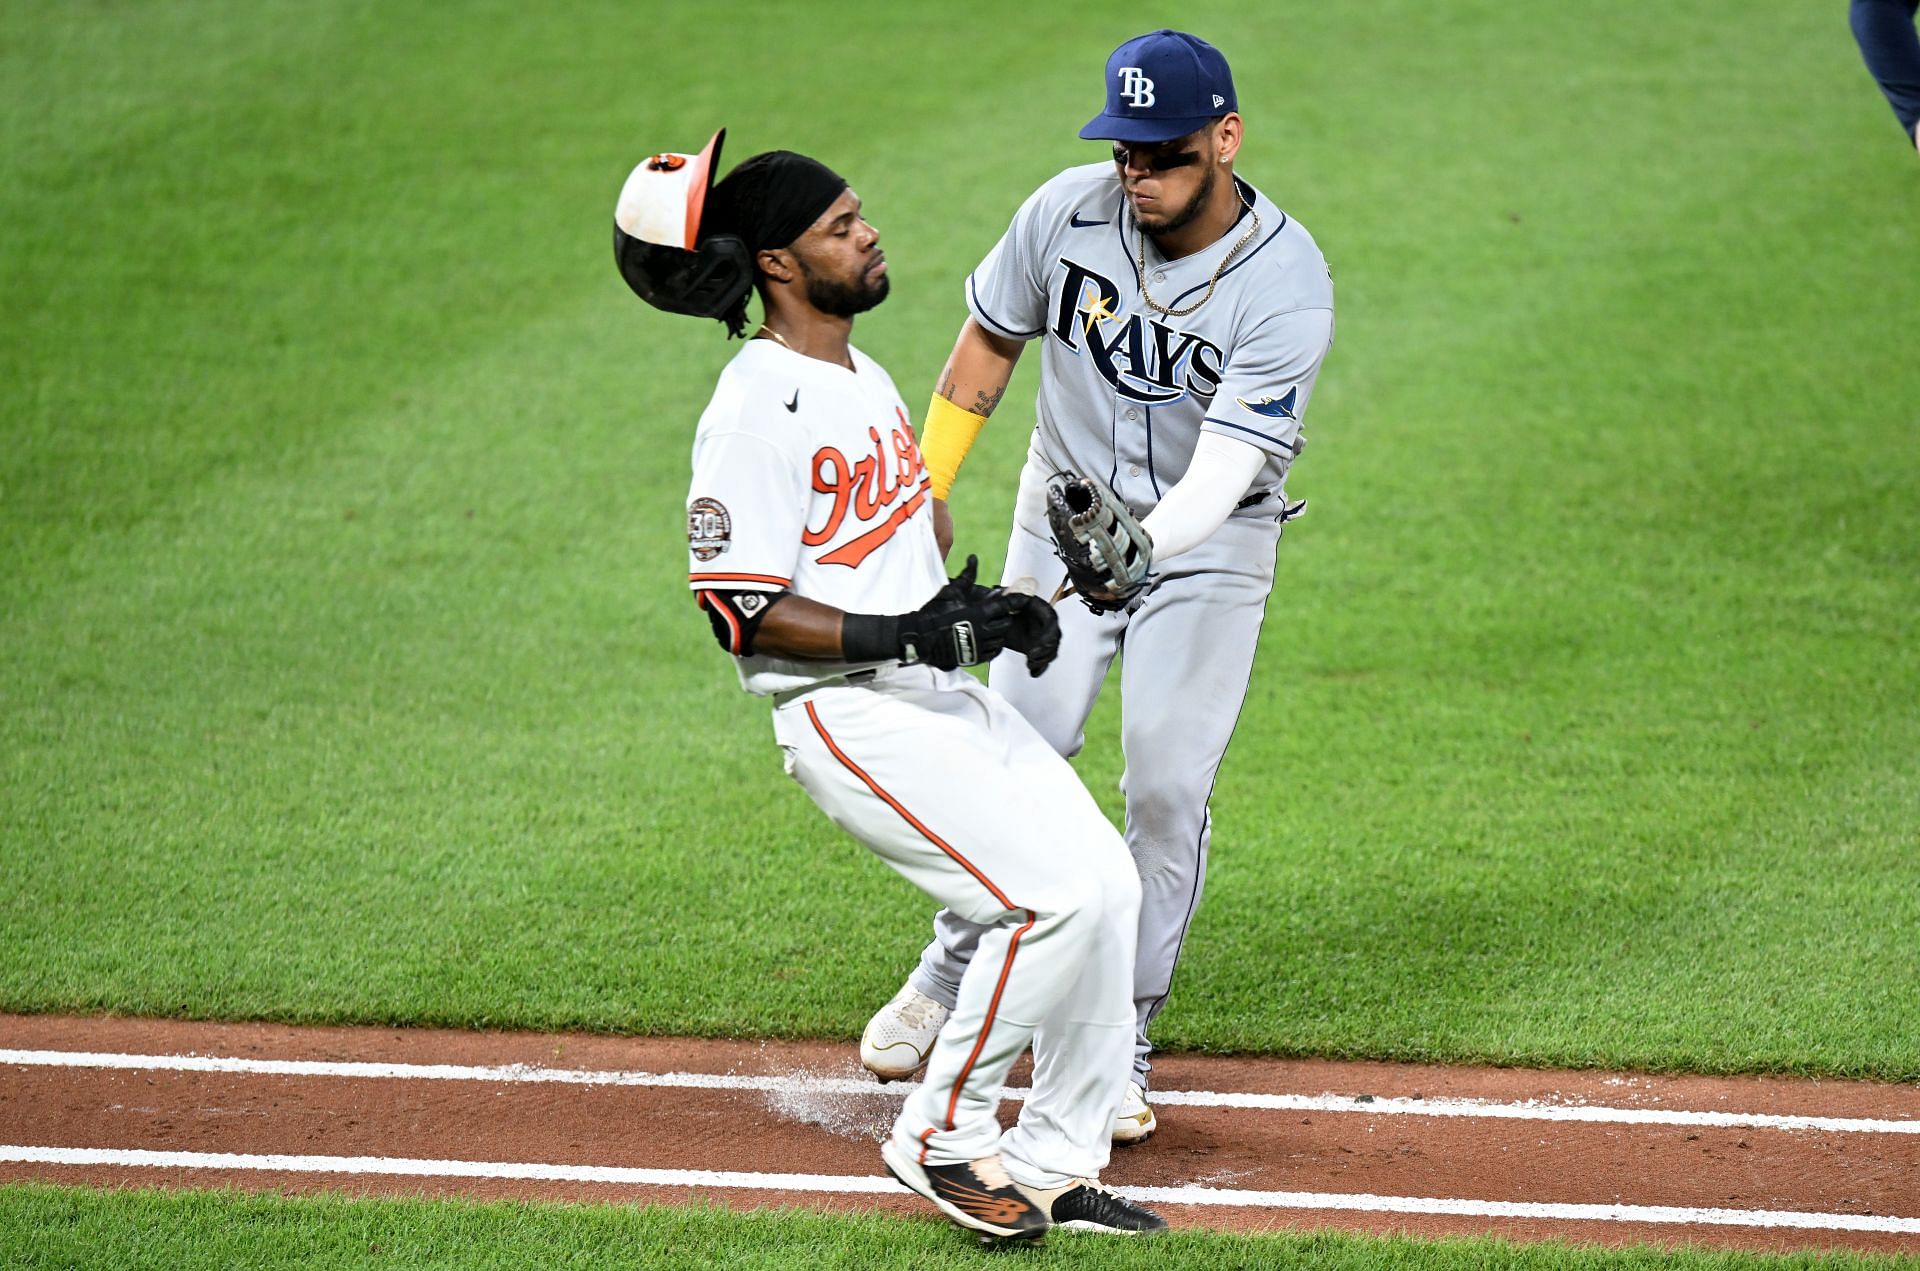 Baltimore Orioles at Tampa Bay Rays odds and predictions